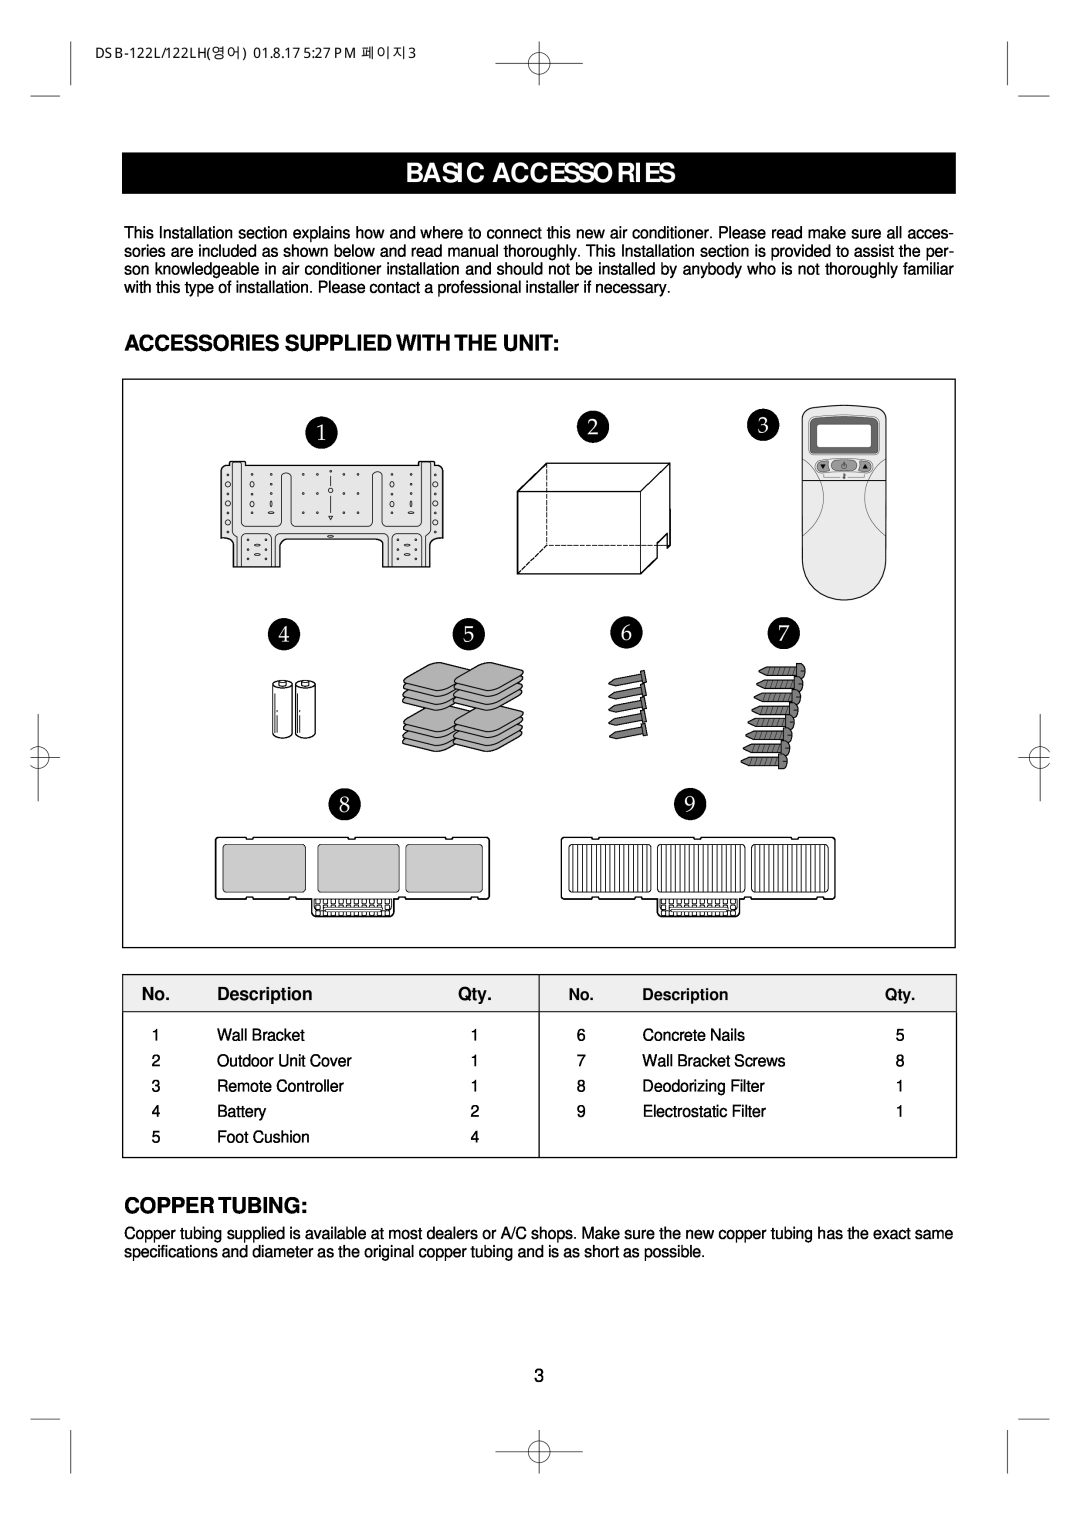 Daewoo DSB-122LH owner manual Basic Accessories, Accessories Supplied With The Unit, Copper Tubing, Description 